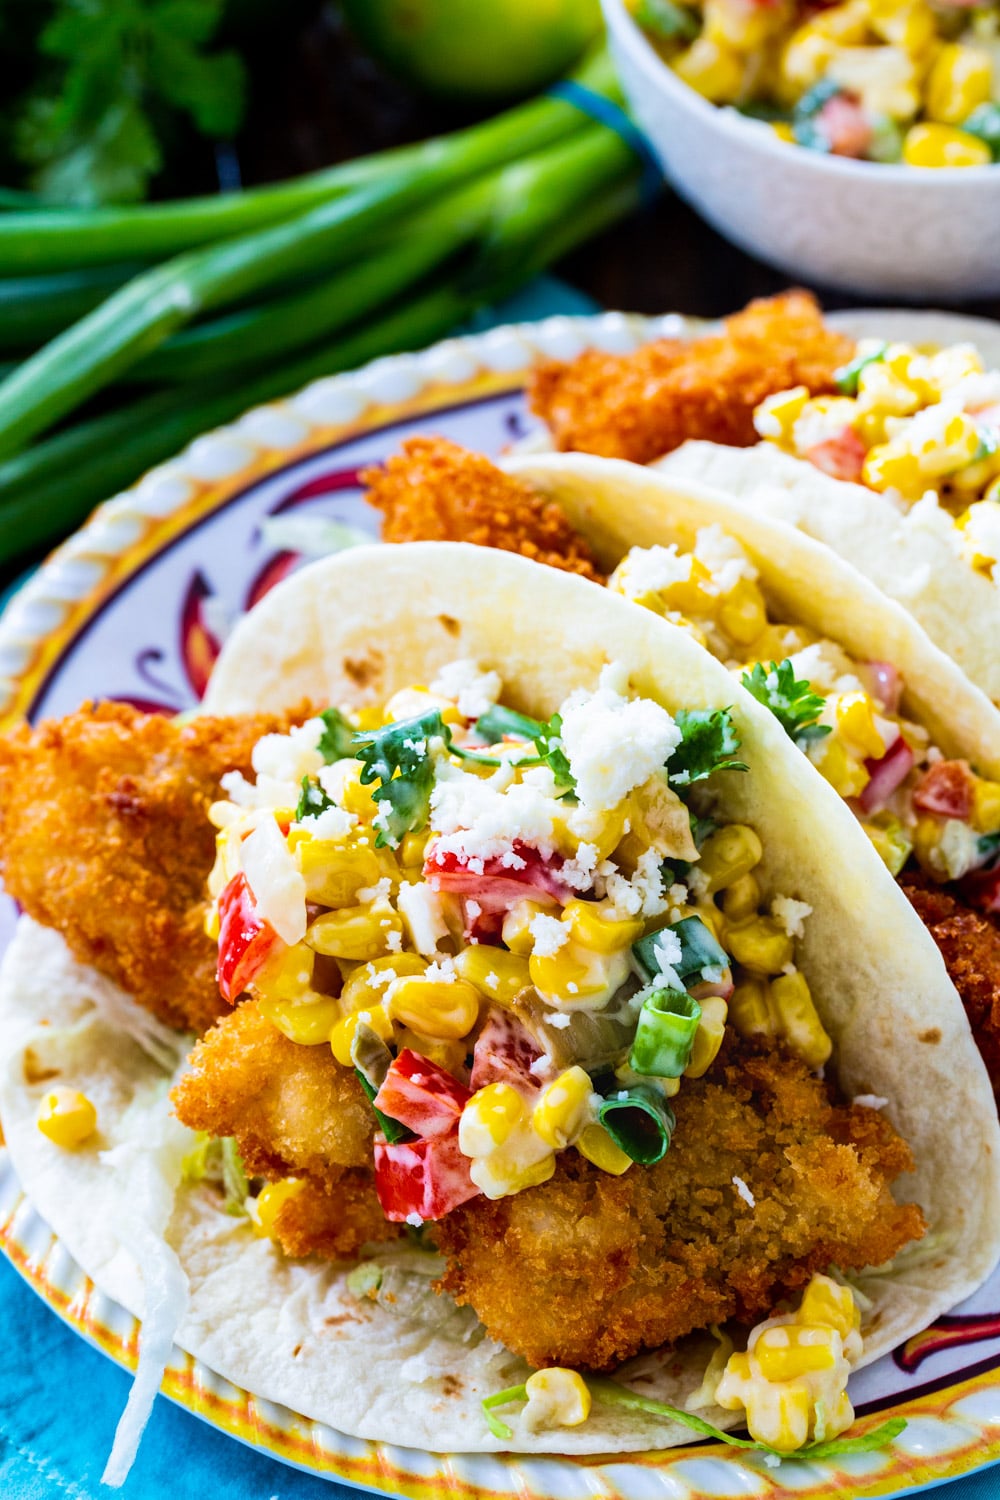 Tacos topped with Tequila Creamed Corn on a plate.